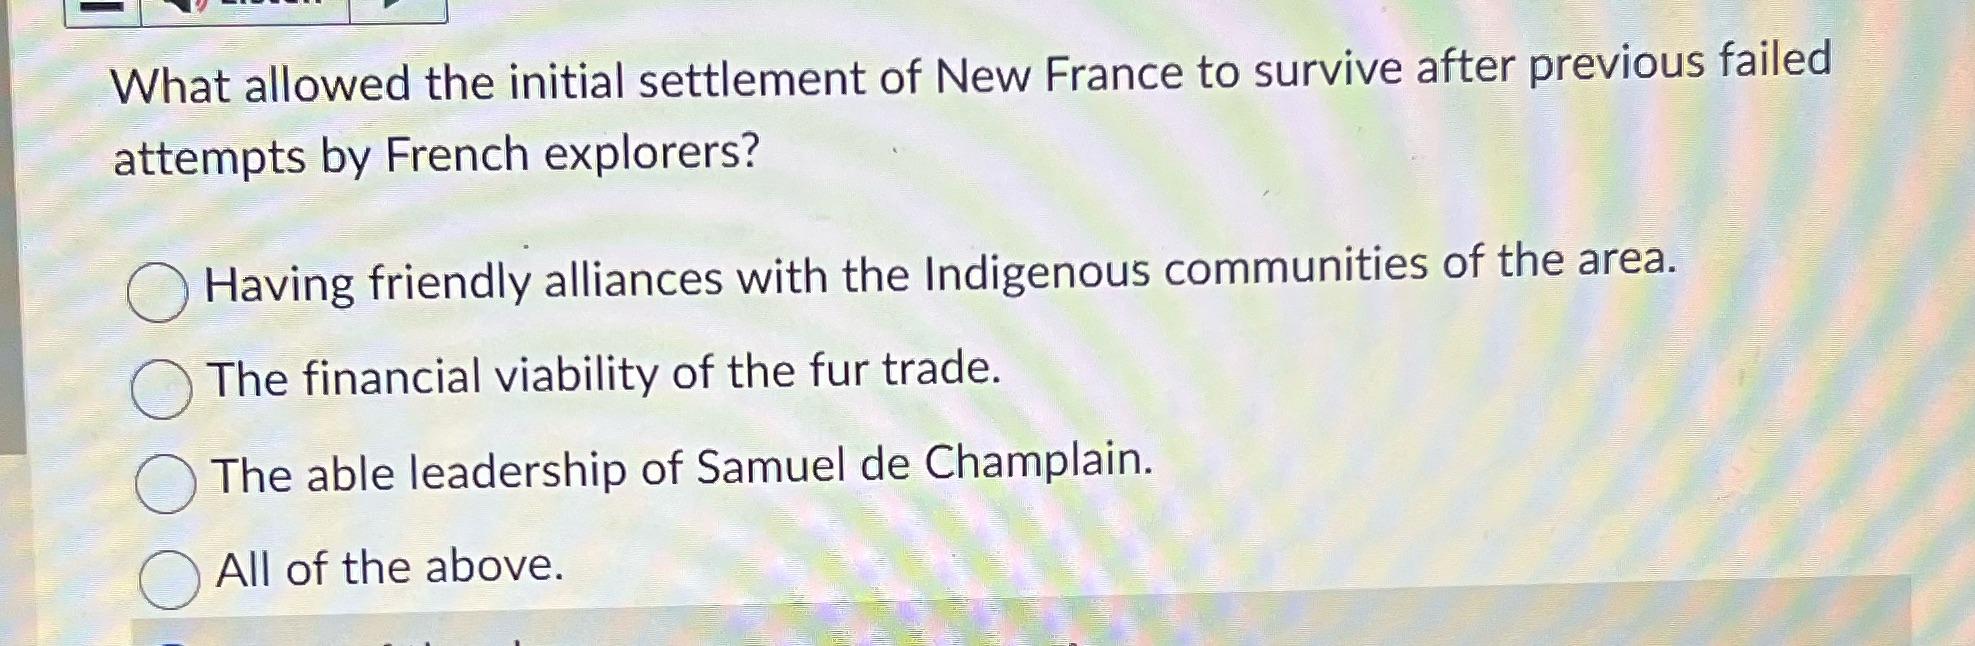 What allowed the initial settlement of New France to survive after previous failed attempts by French